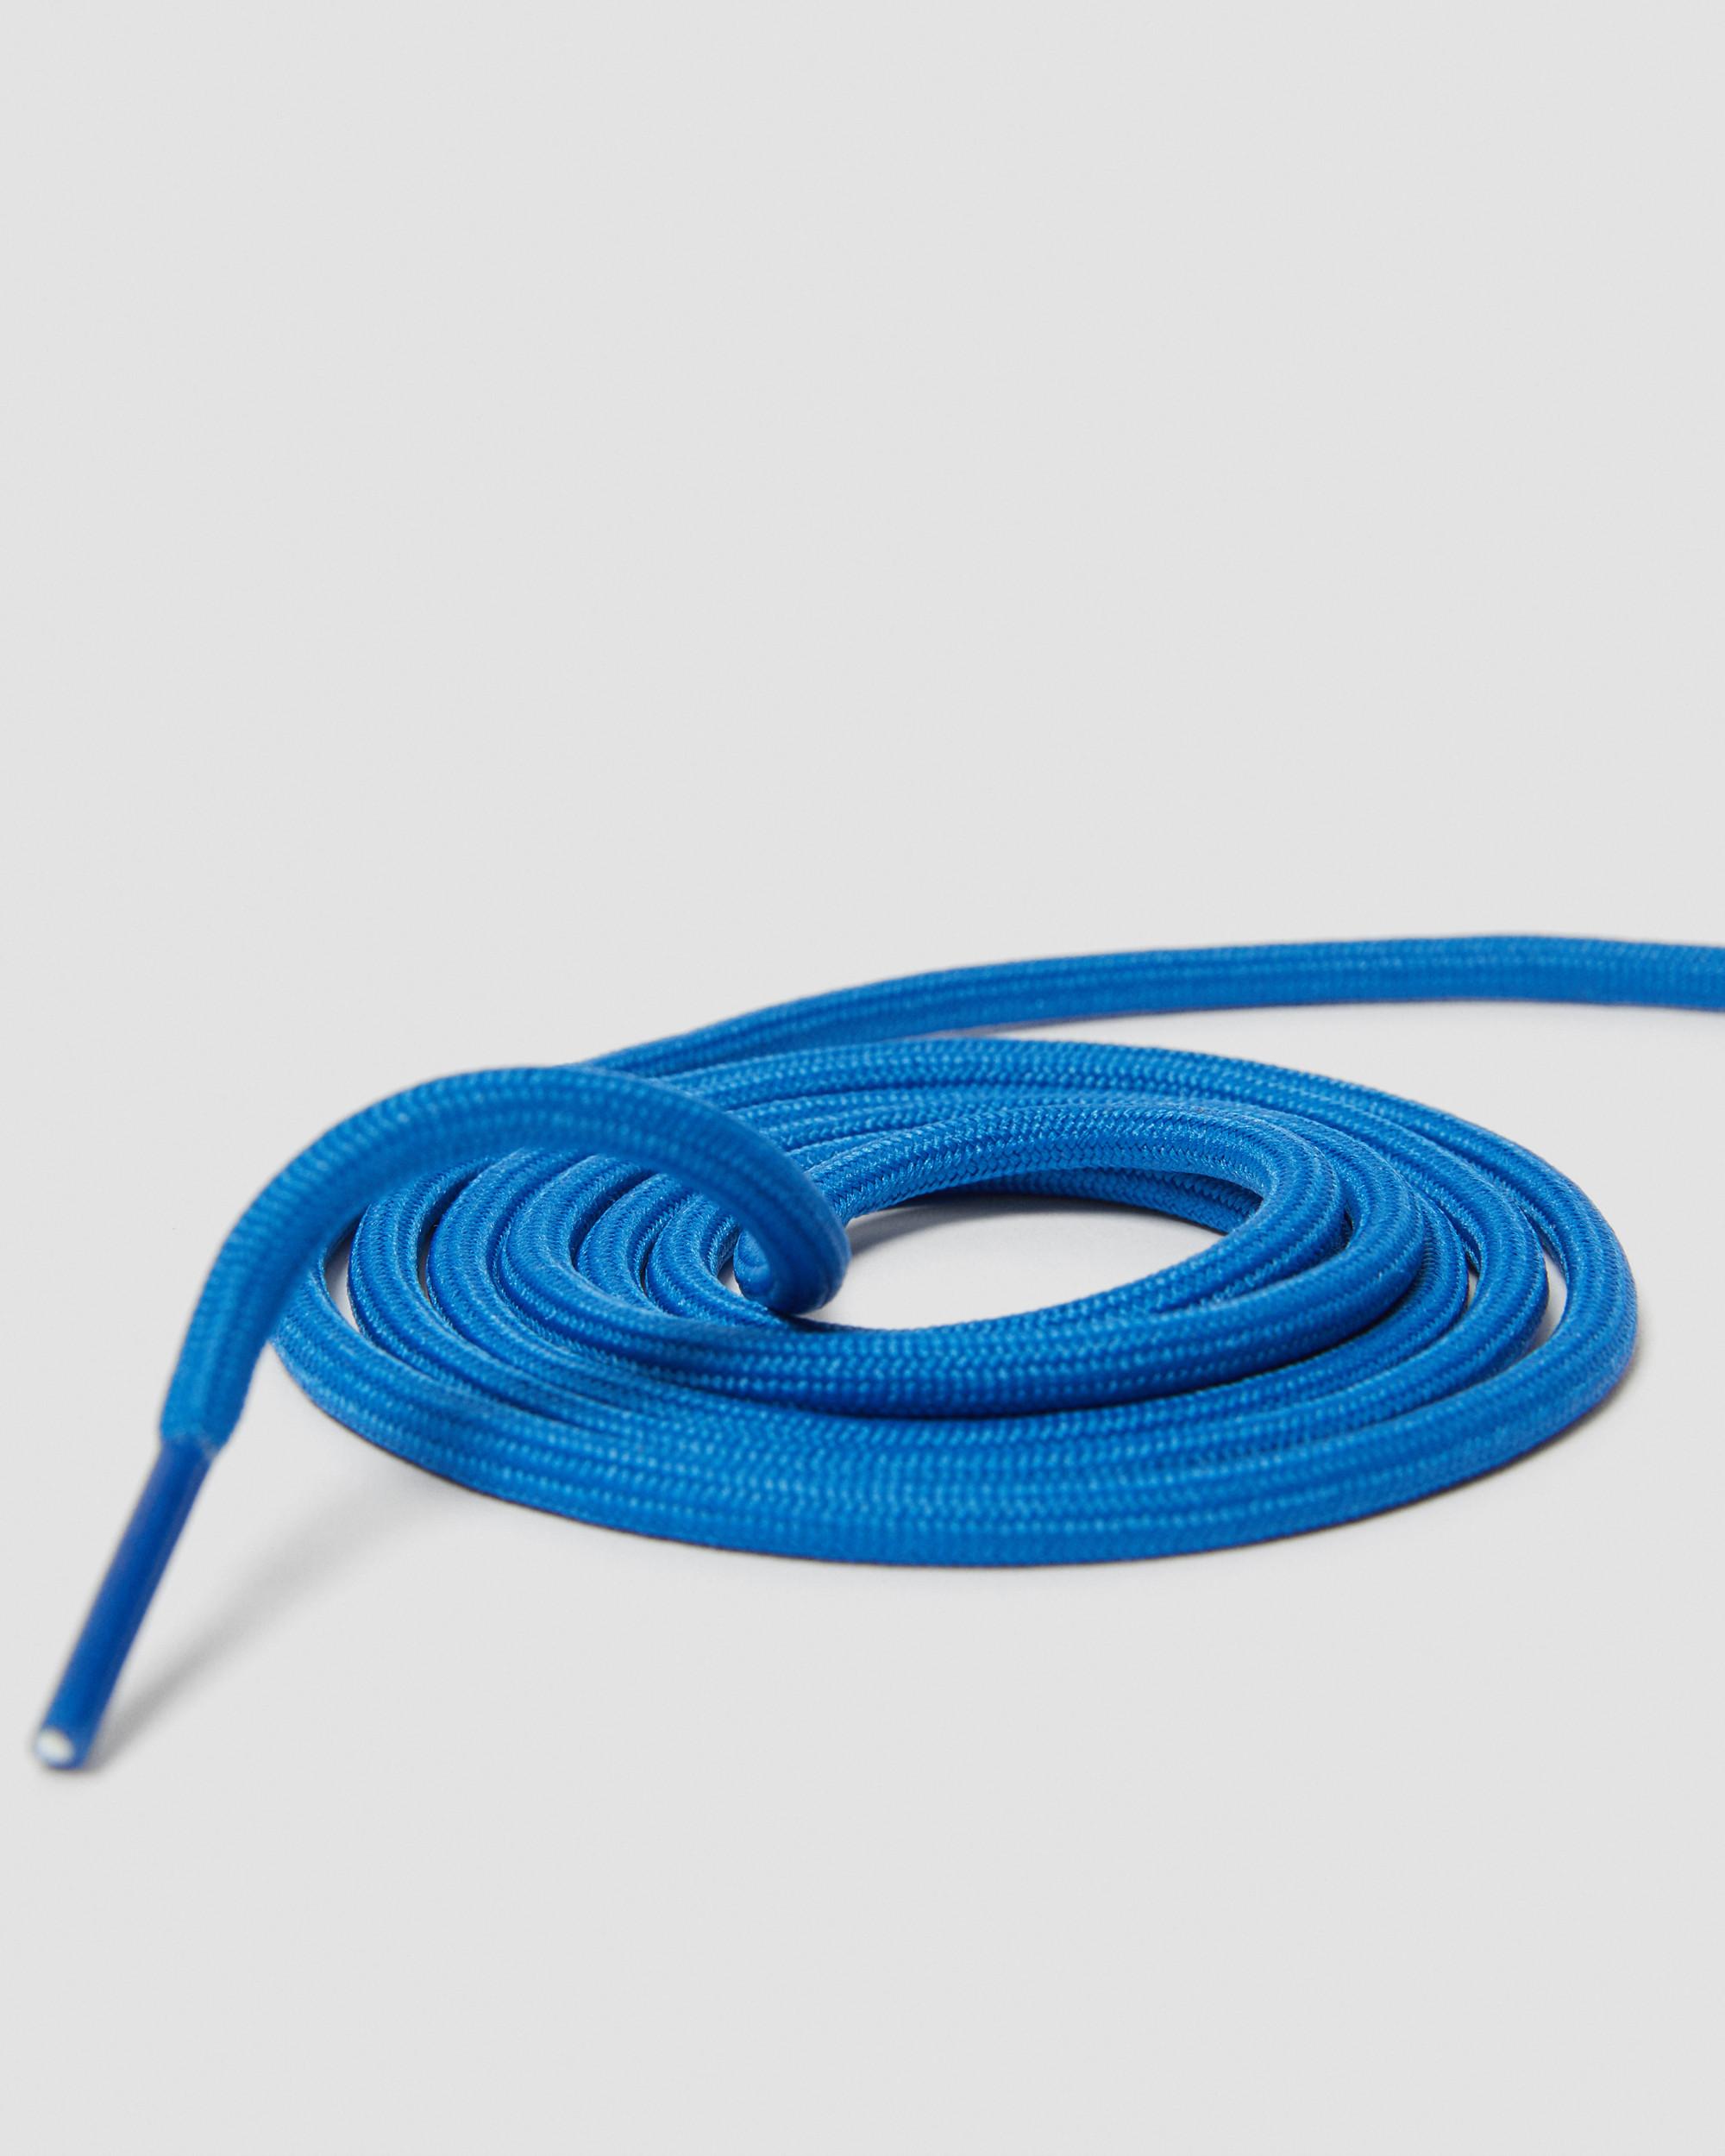 55 Inch Round Shoe Laces (8-10 Eye) in Blue